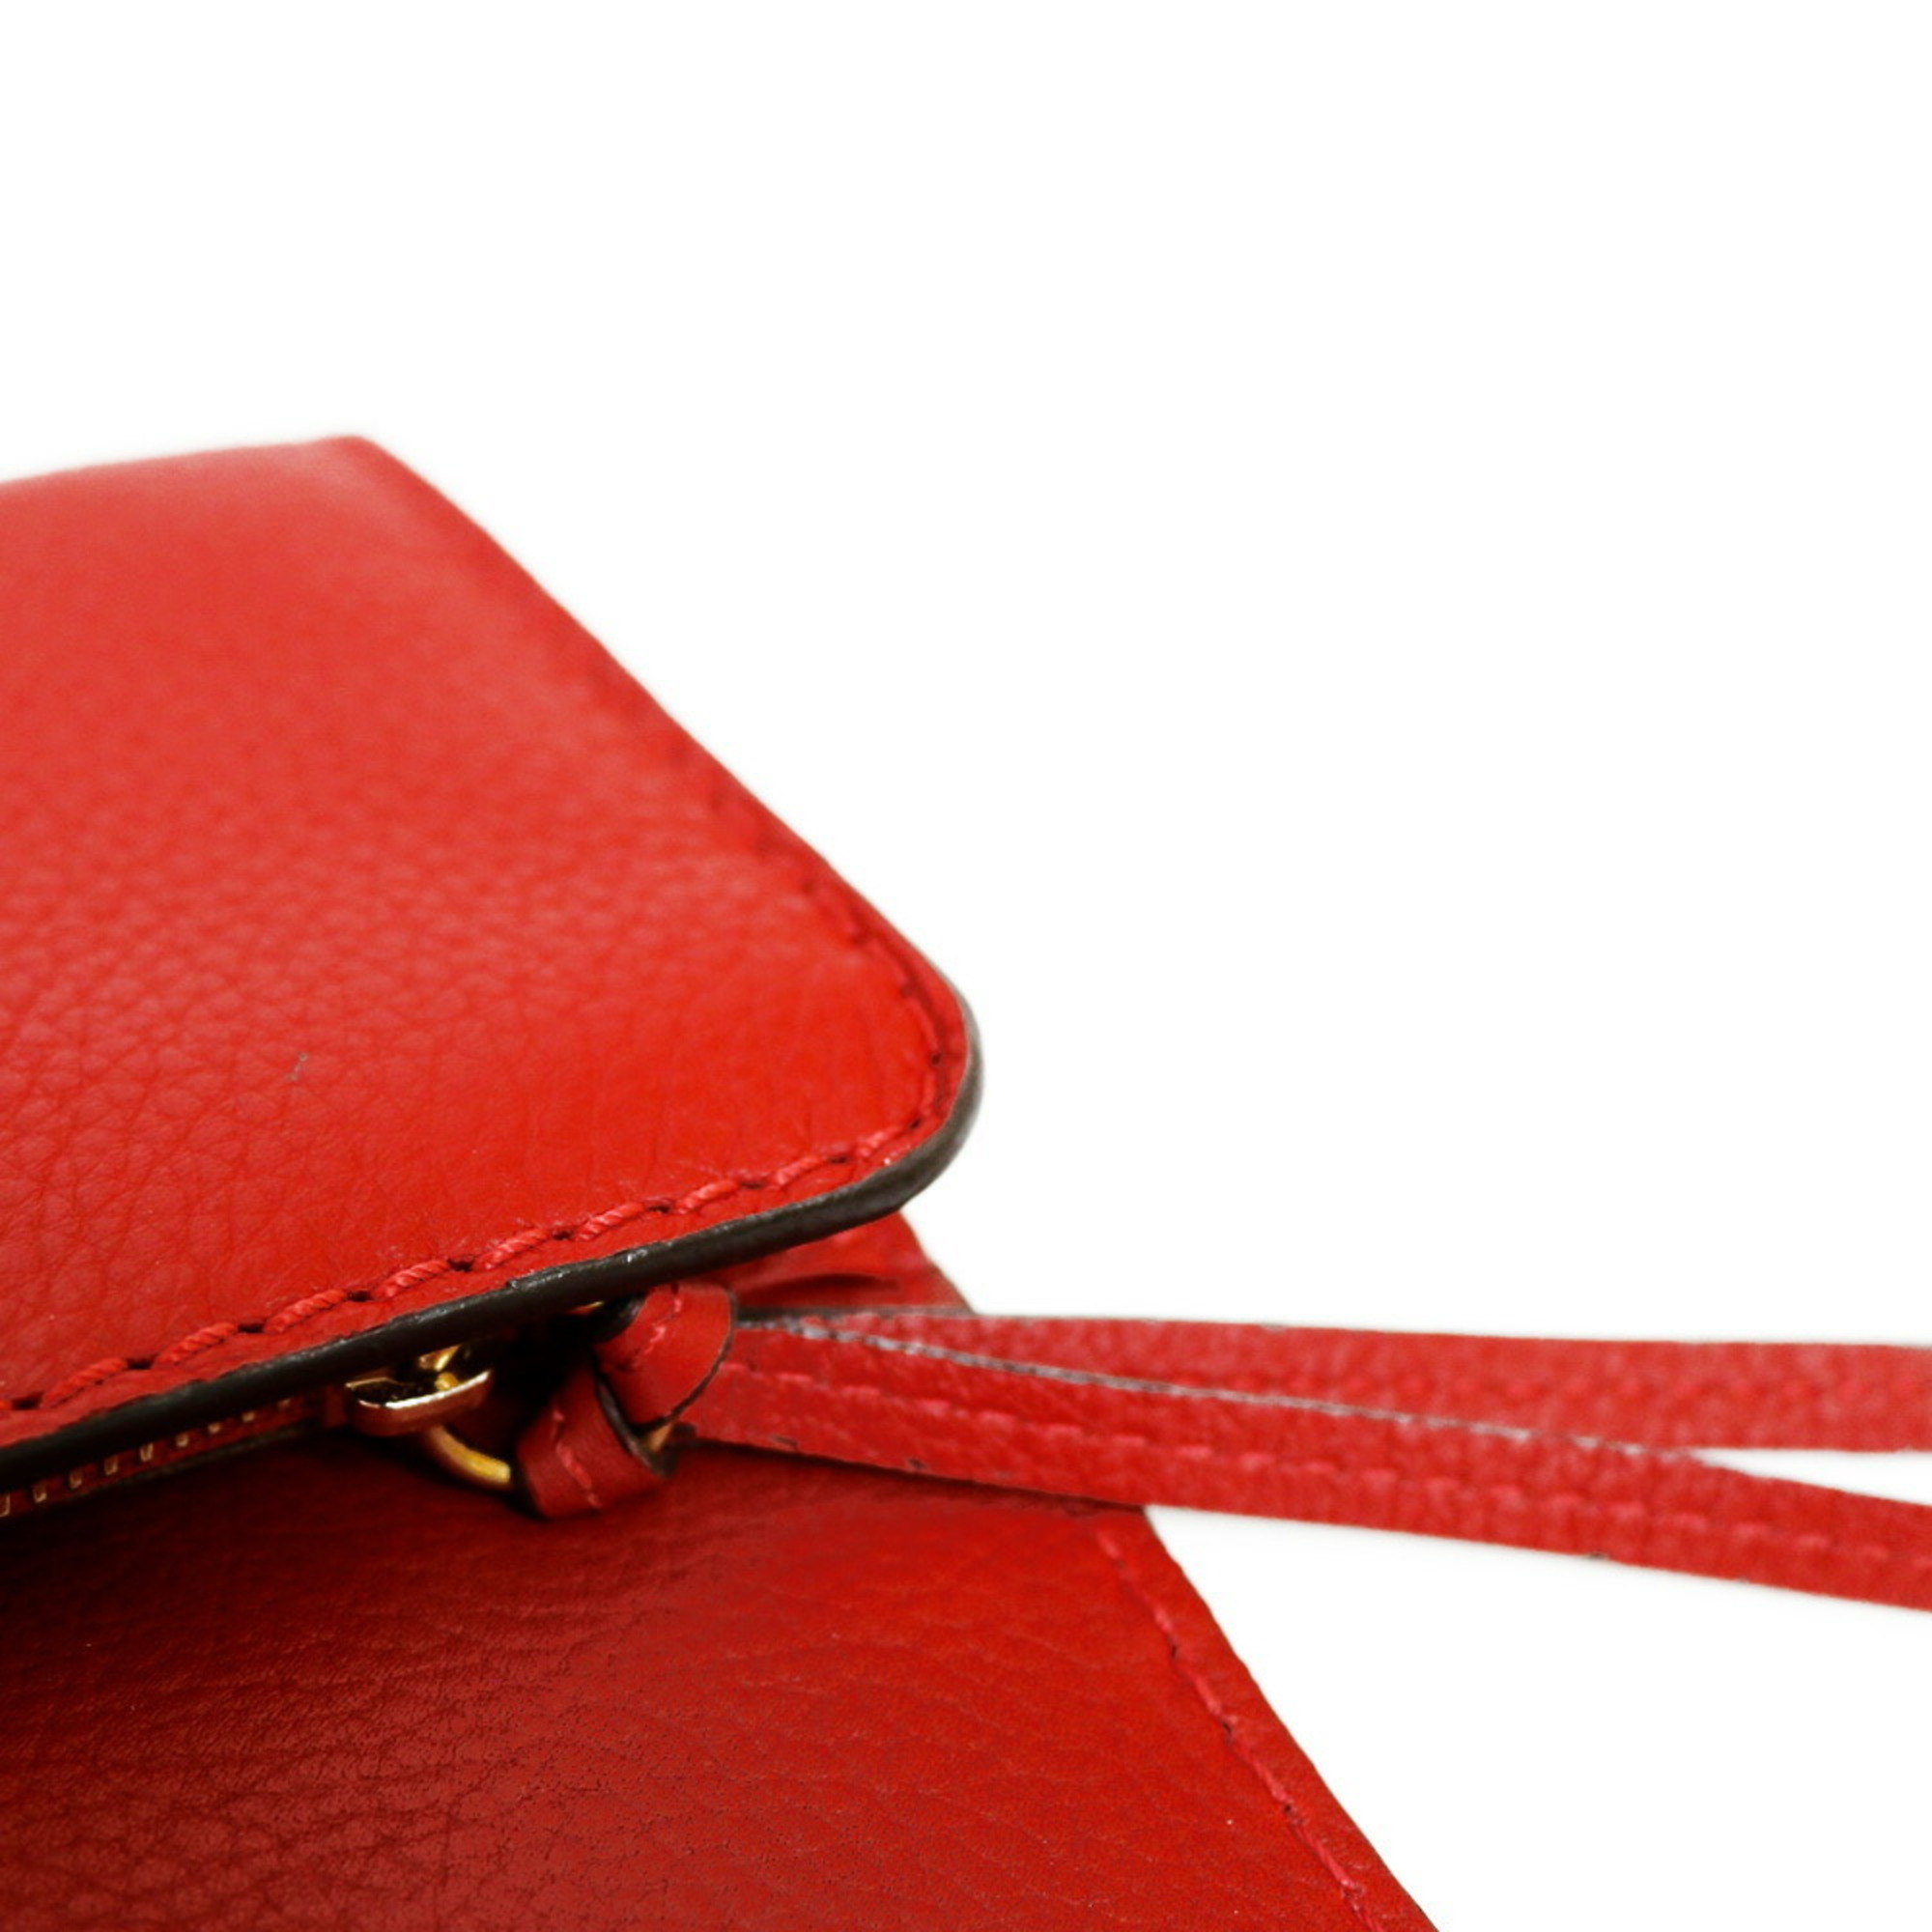 Chloé Chloe Purse Red Ladies Leather